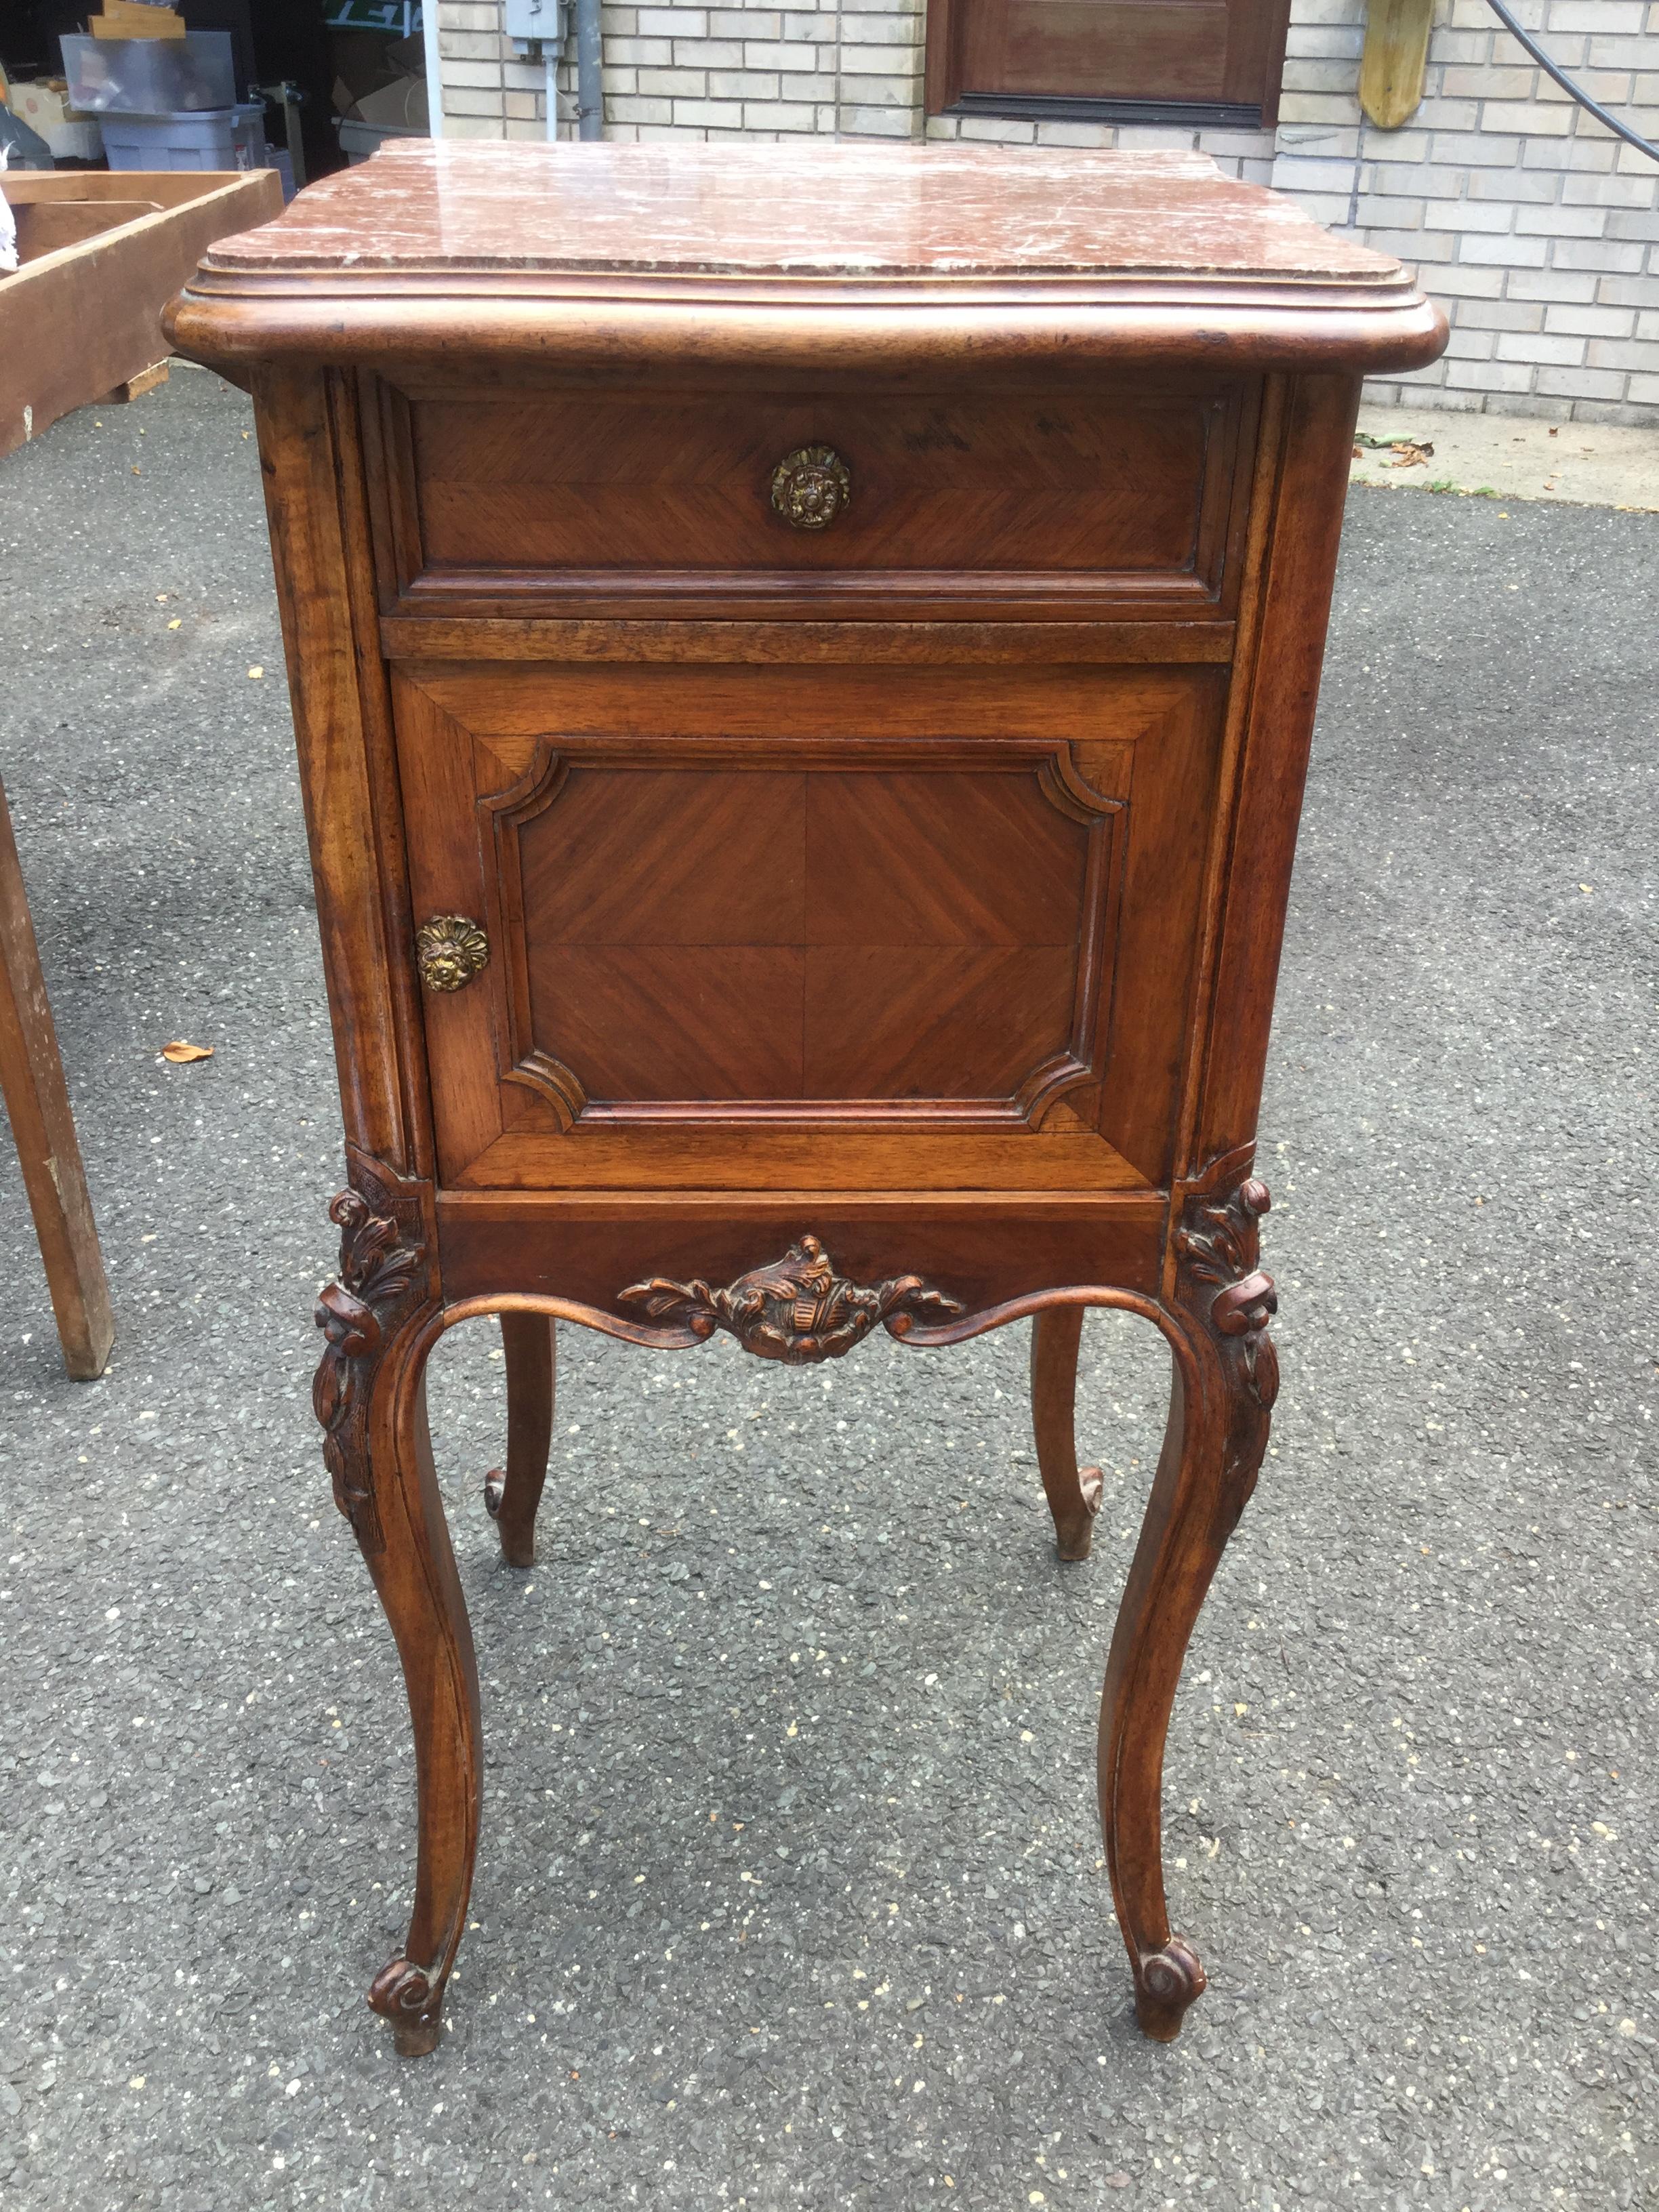 Charming French Louis XV-style night/side table. With a marble top, this is the perfect bed-side or sofa-side table. Floral motif carvings adorn the top and bottom legs. There is one drawer, and the door features marquetry while concealing a